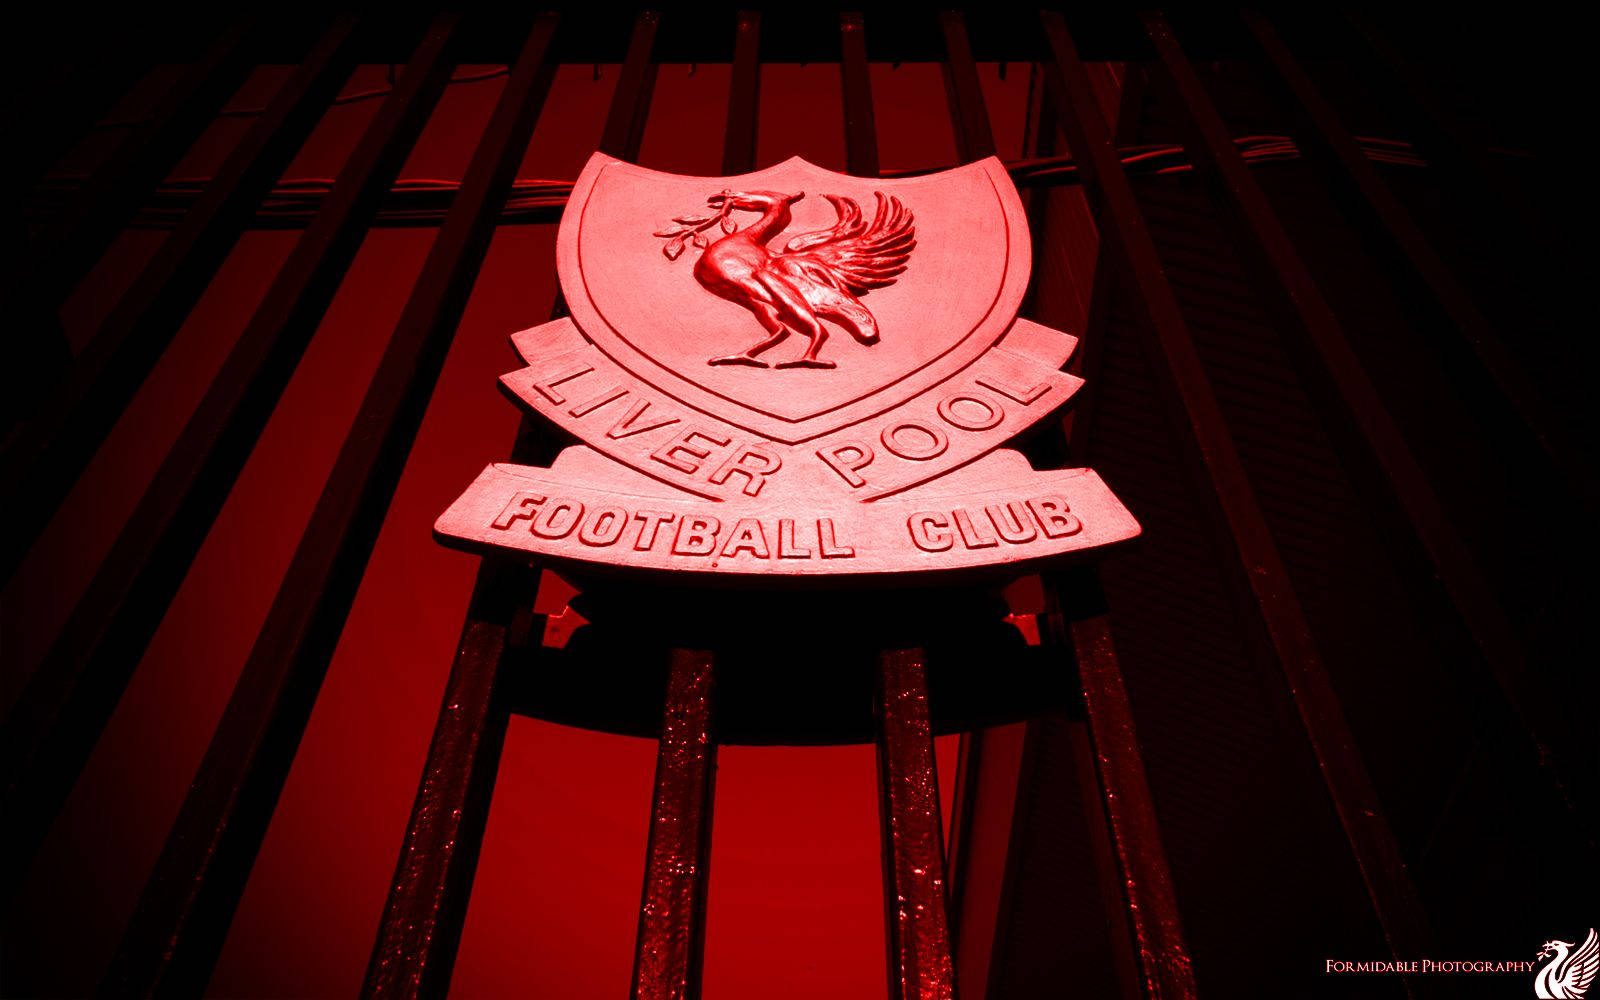 Liverpool Fc Logo At Anfield's Shankly Gates